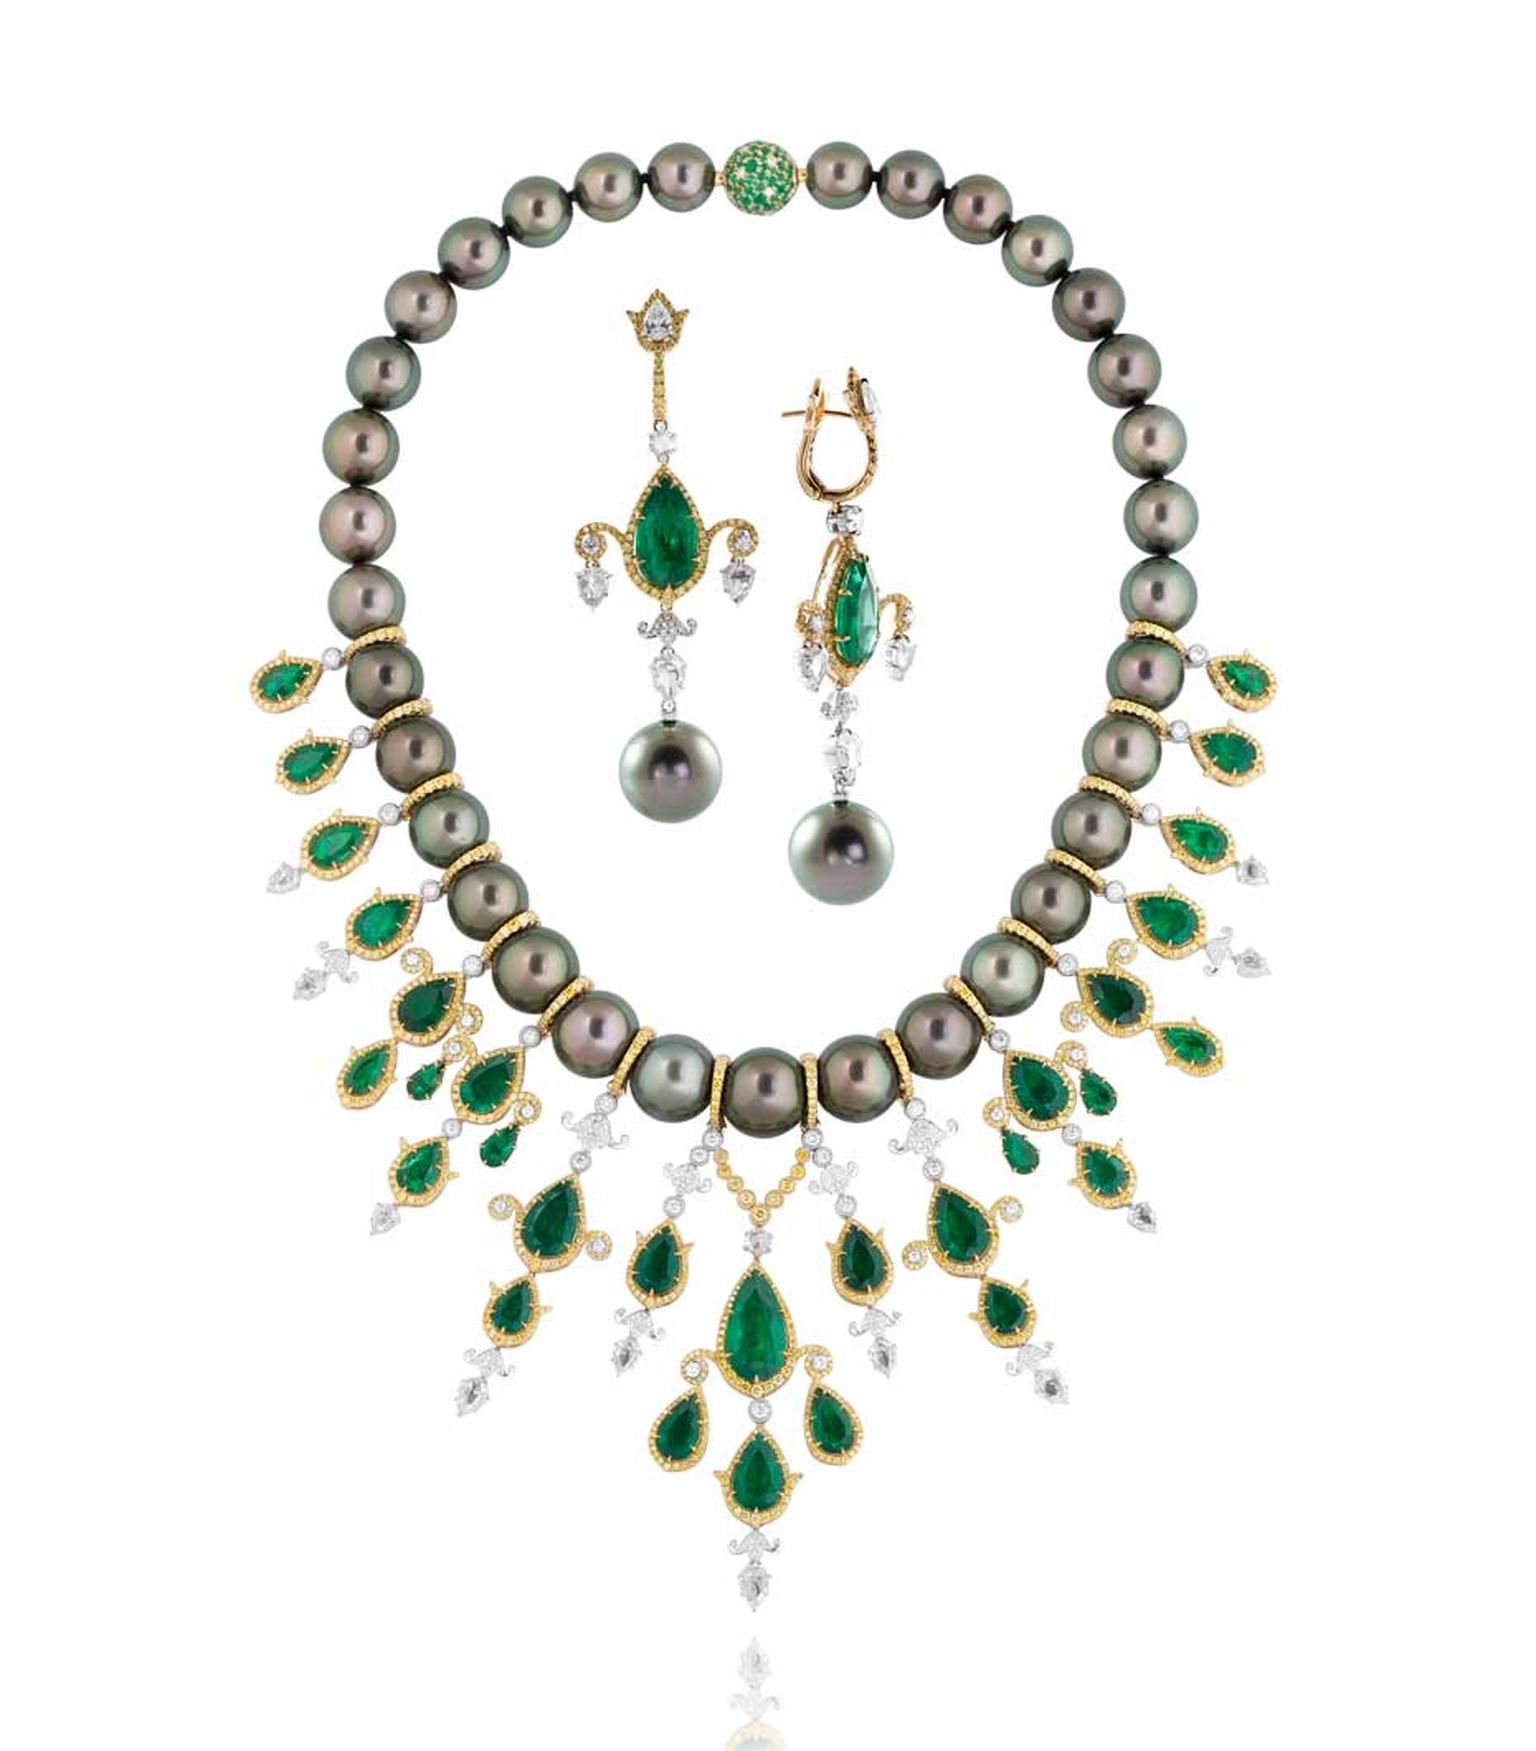 Former Couture Design Awards finalist Alessio Boschi's Breakfast in Jaipur Tahitian pearl, emerald and diamond necklace and earrings.